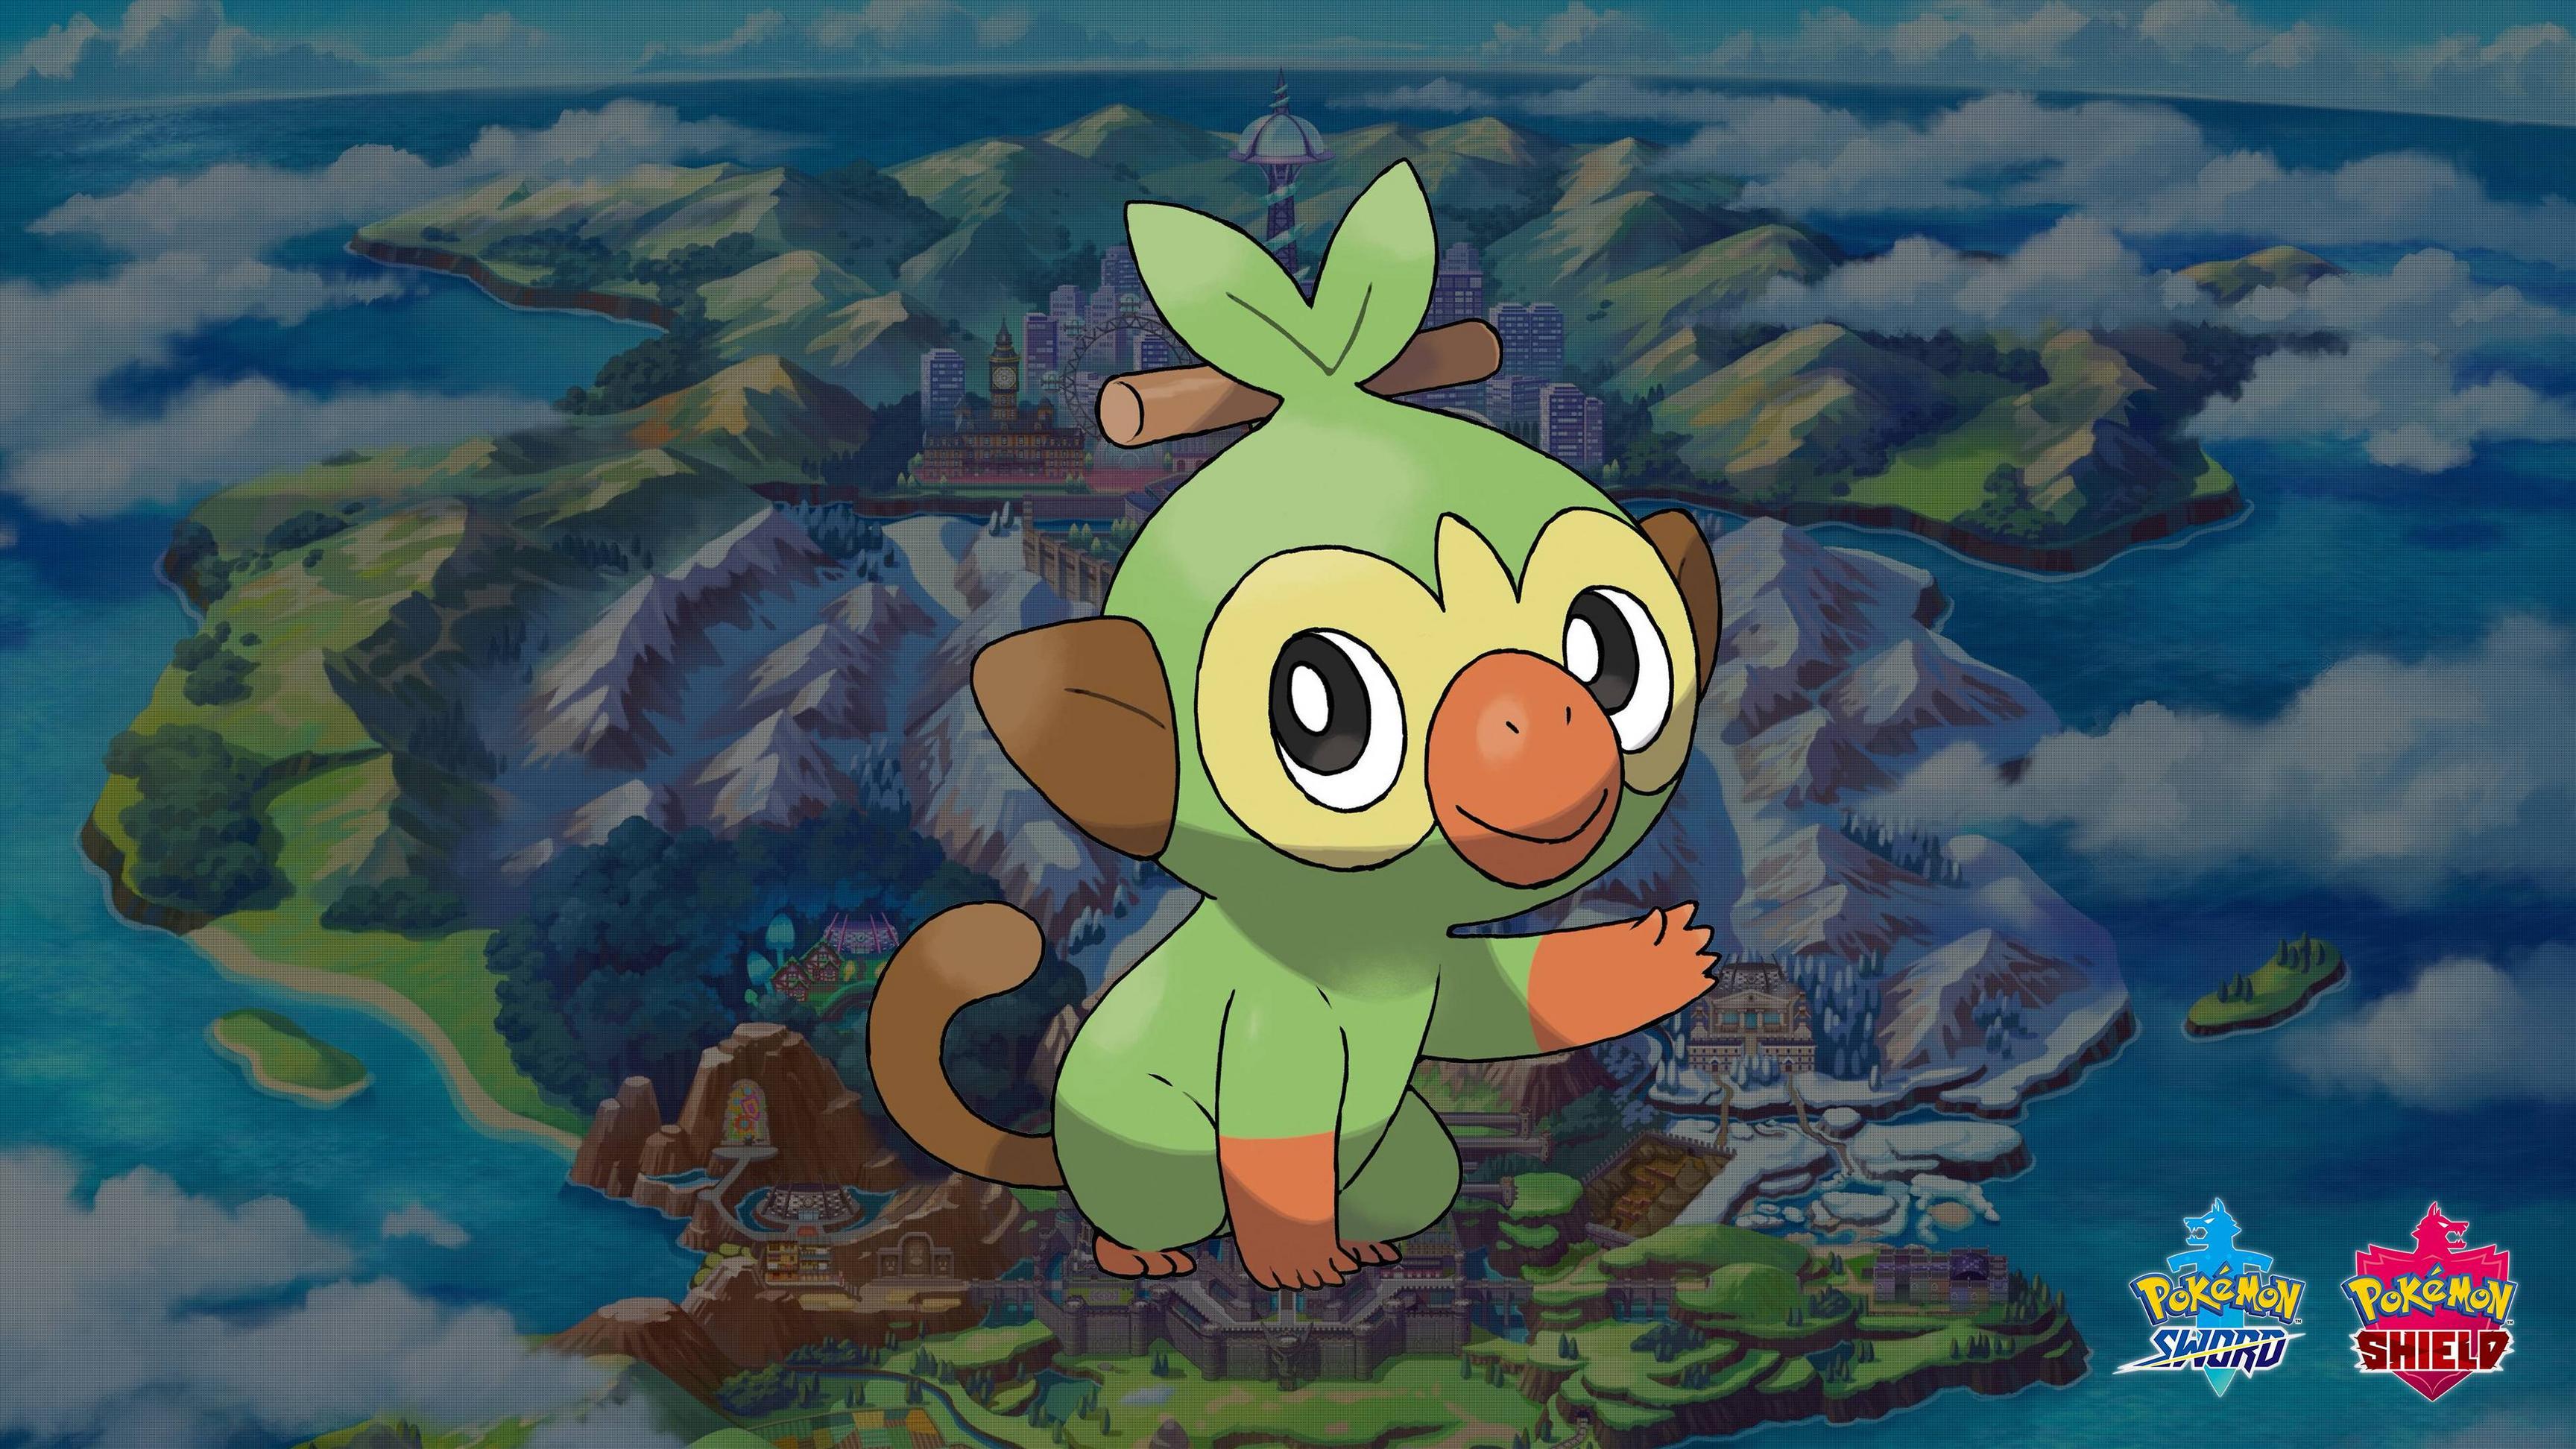 Pokemon Sword and Shield Grookey Wallpaper. Cat with Monocle